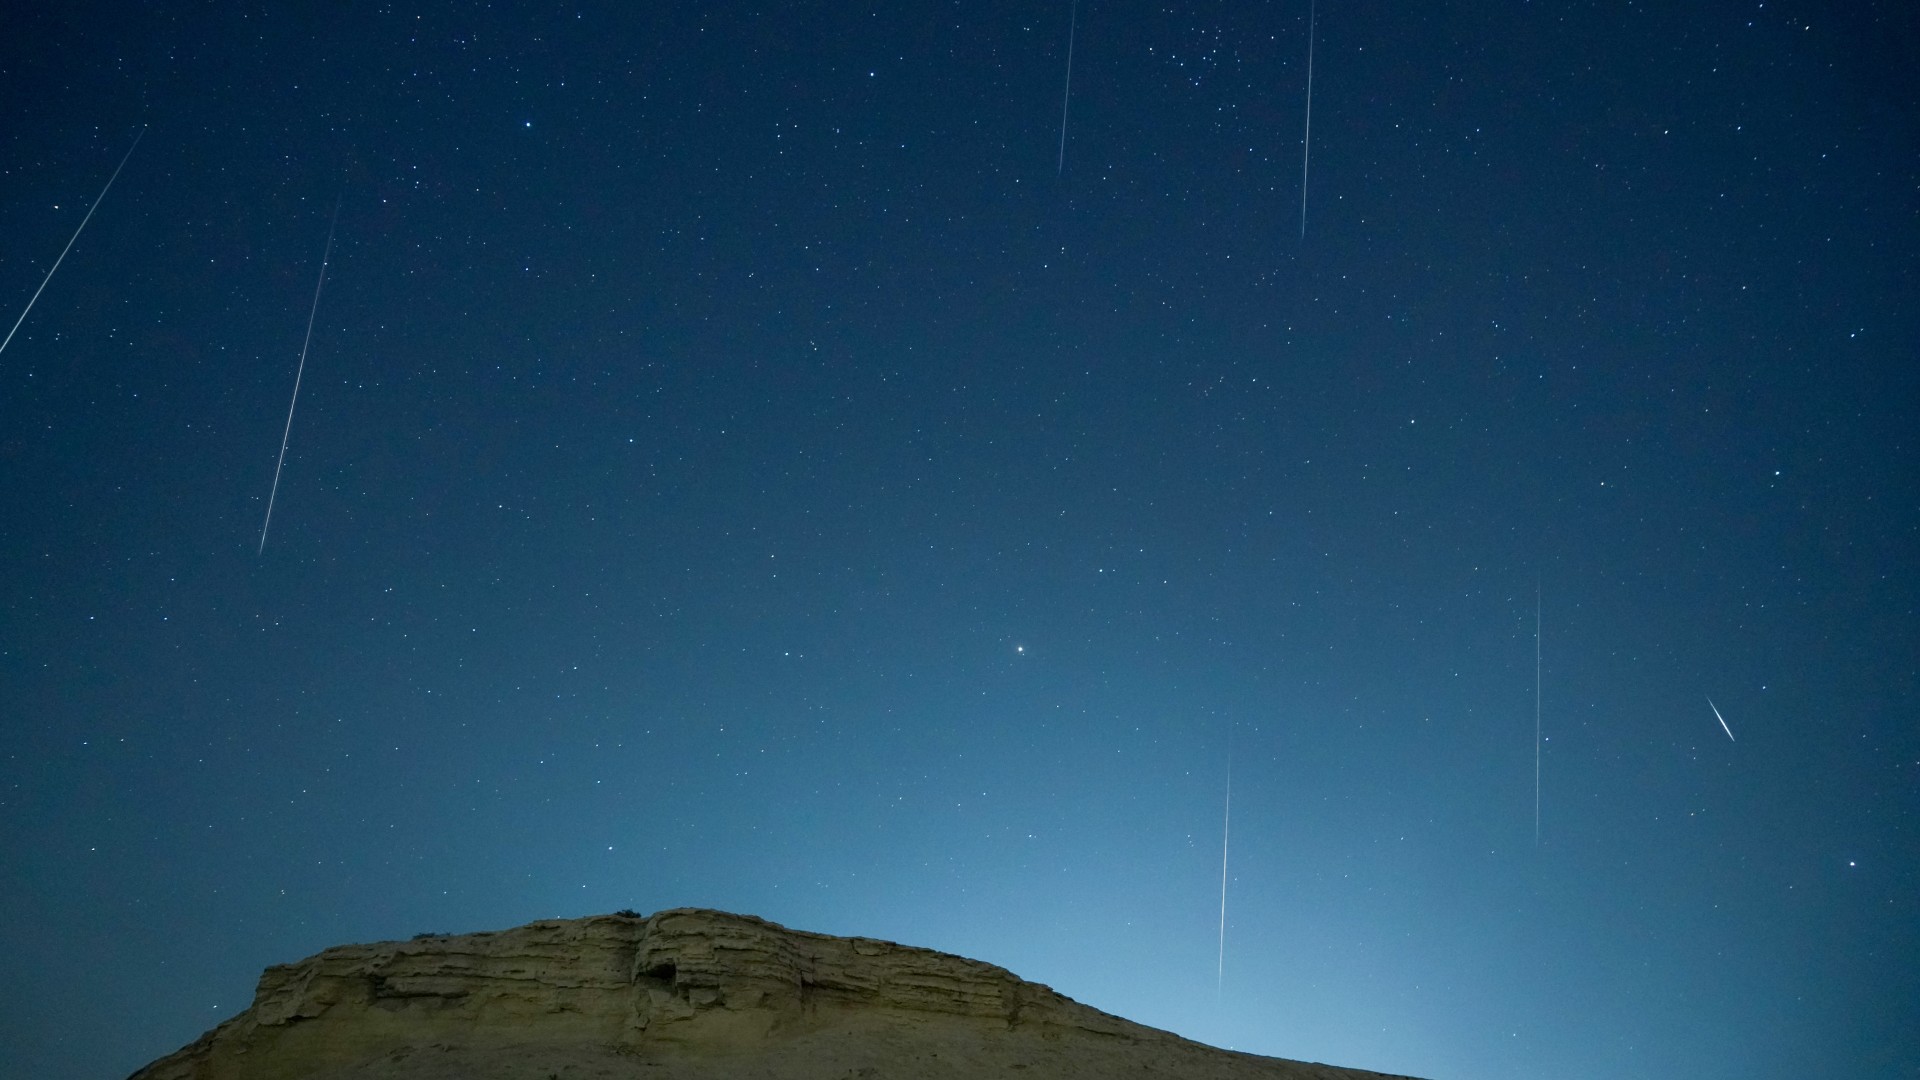 Shooting stars are the next phase of space tech